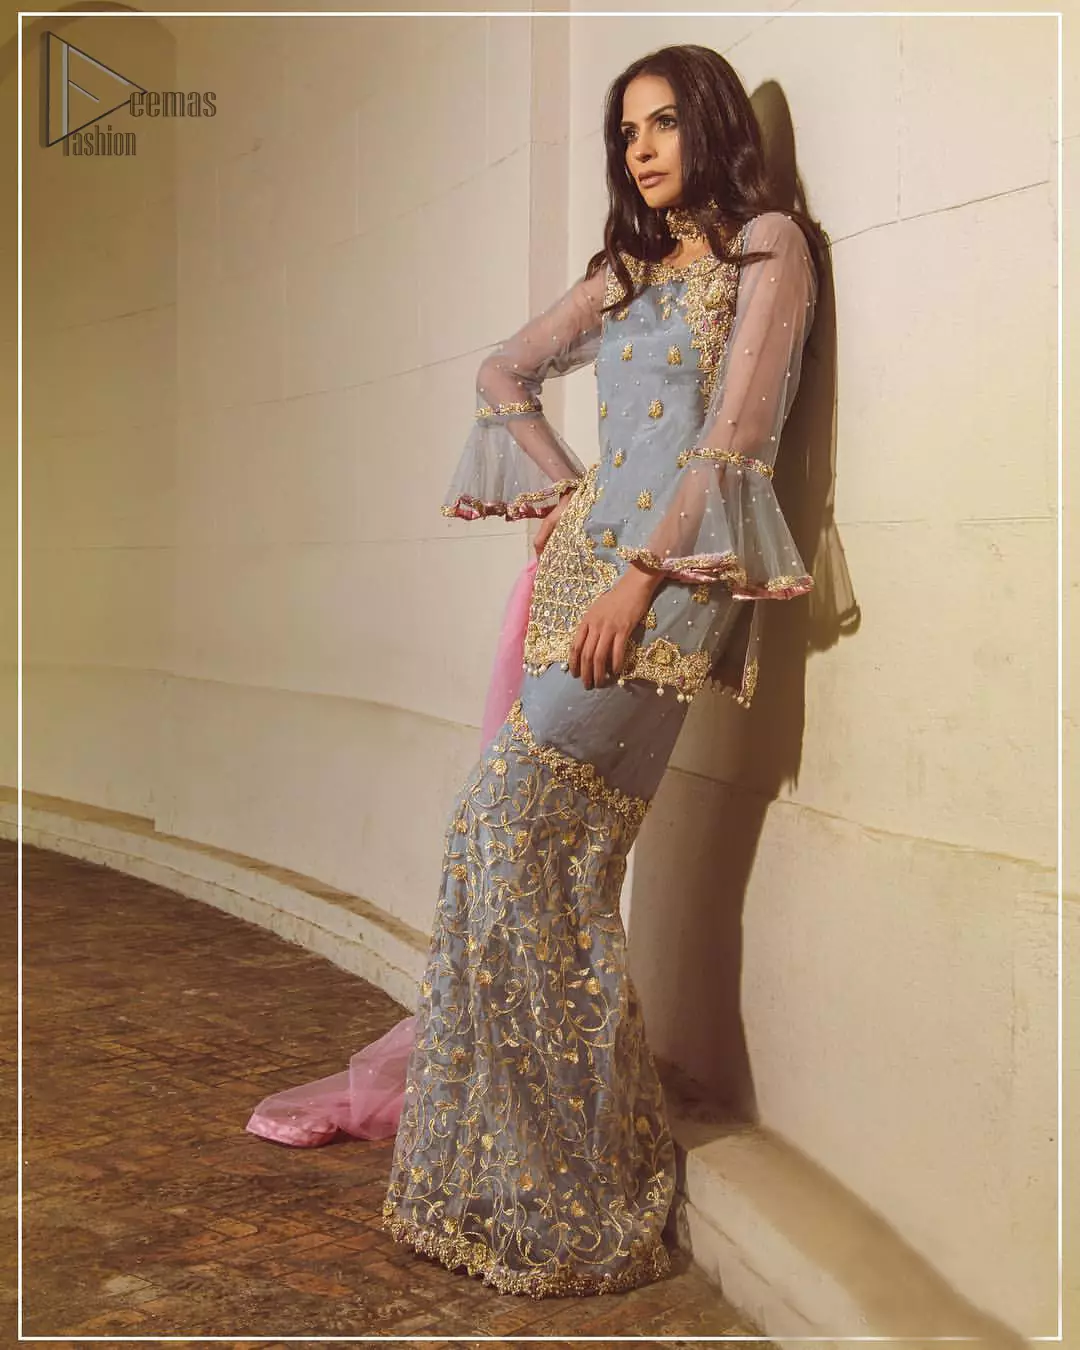 Embrace the season of festivities with this beautiful dress. The chic yet elegant outfit is decorated with golden embroidery, embellished neckline and tiny floral motifs. Borders are even more enhanced with golden zardozi detailed patterns and finished with scallops and dangling balls. Pair it up with gray sharara highlighted with floral jaal and scalloped bottom done with golden kora, dabka and tilla work. The look is complete with pink net dupatta sprinkled with sequins all over.